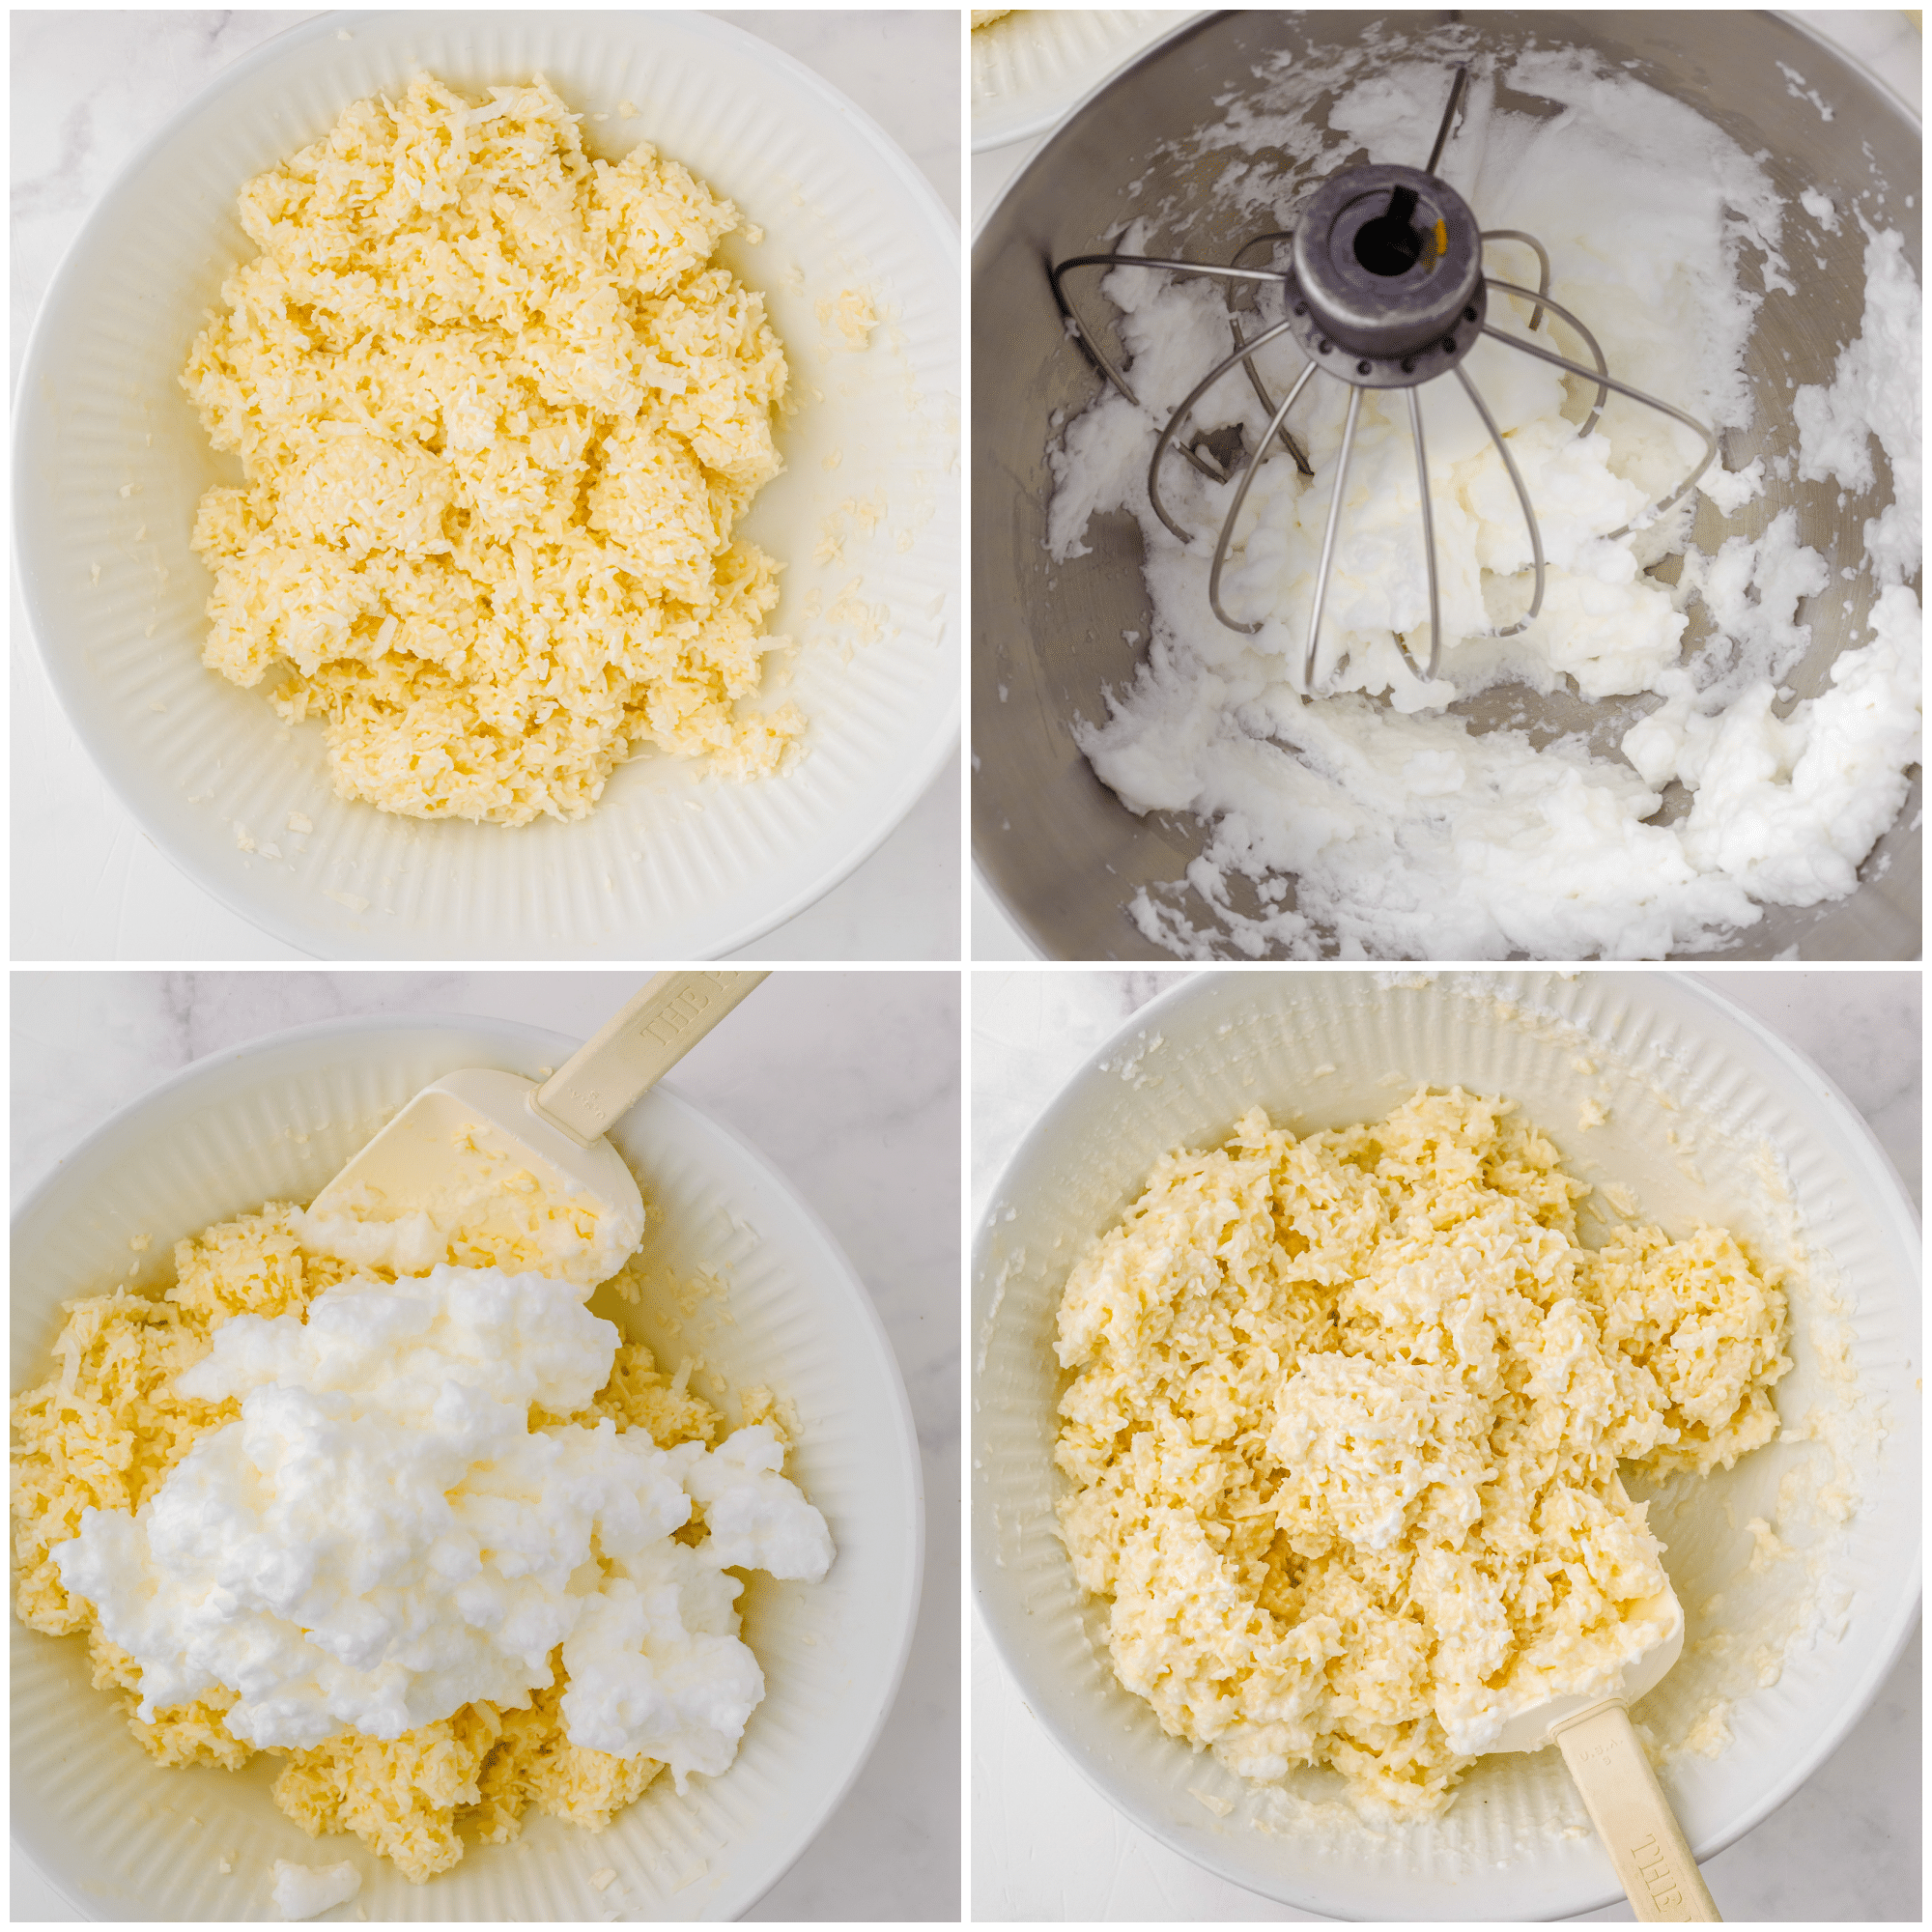 Collage of photos showing step by step instructions for making recipe.